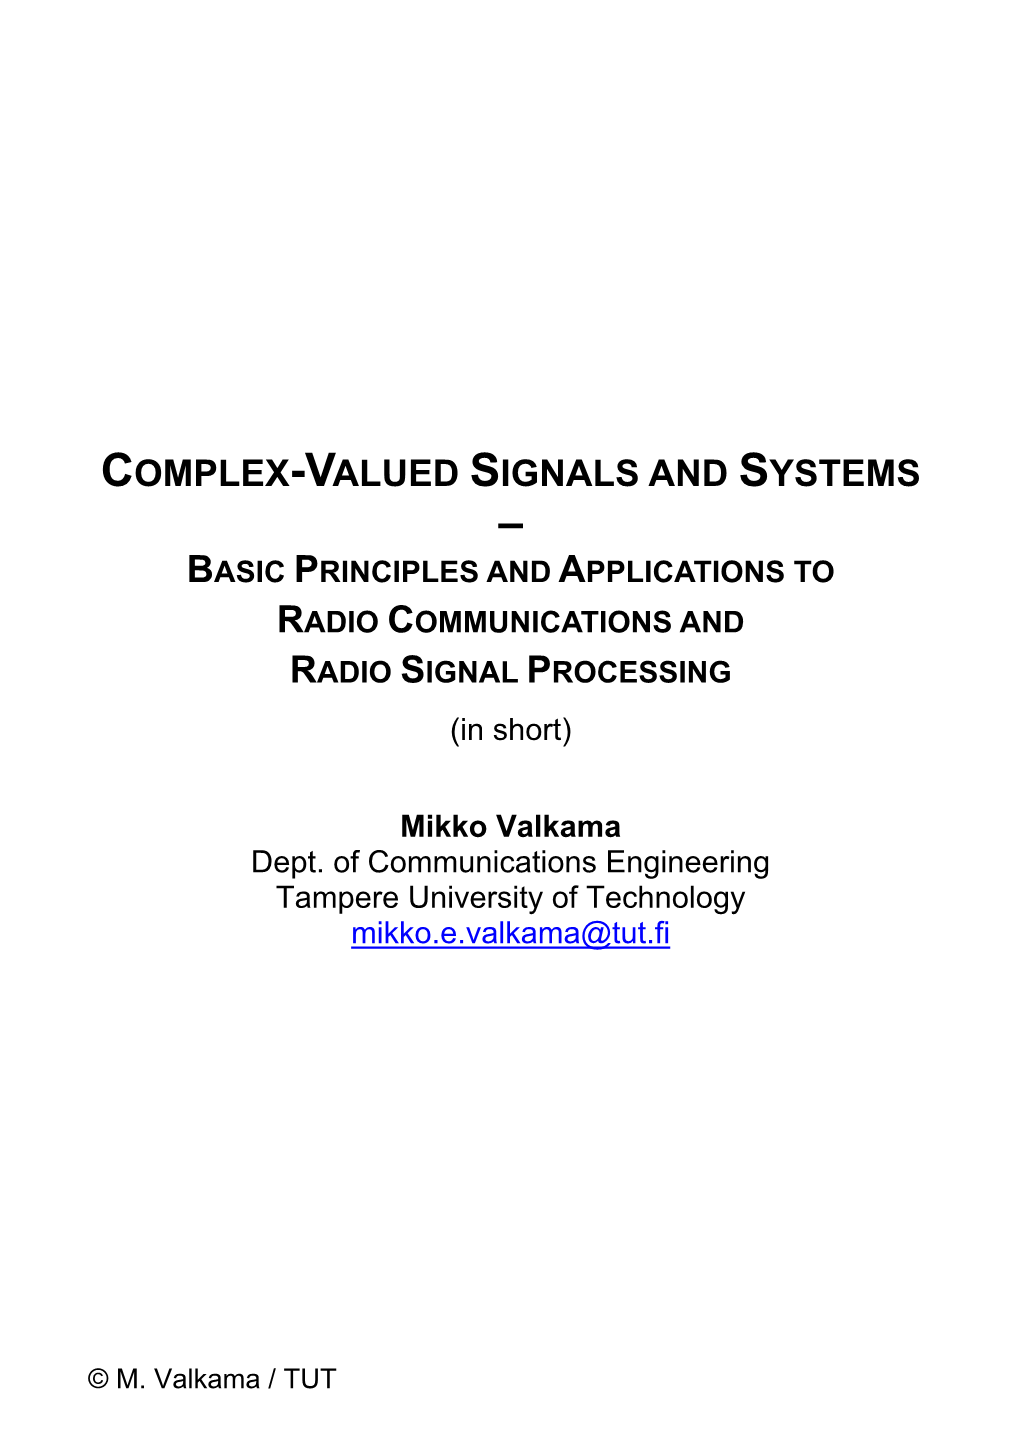 COMPLEX-VALUED SIGNALS and SYSTEMS – BASIC PRINCIPLES and APPLICATIONS to RADIO COMMUNICATIONS and RADIO SIGNAL PROCESSING (In Short)